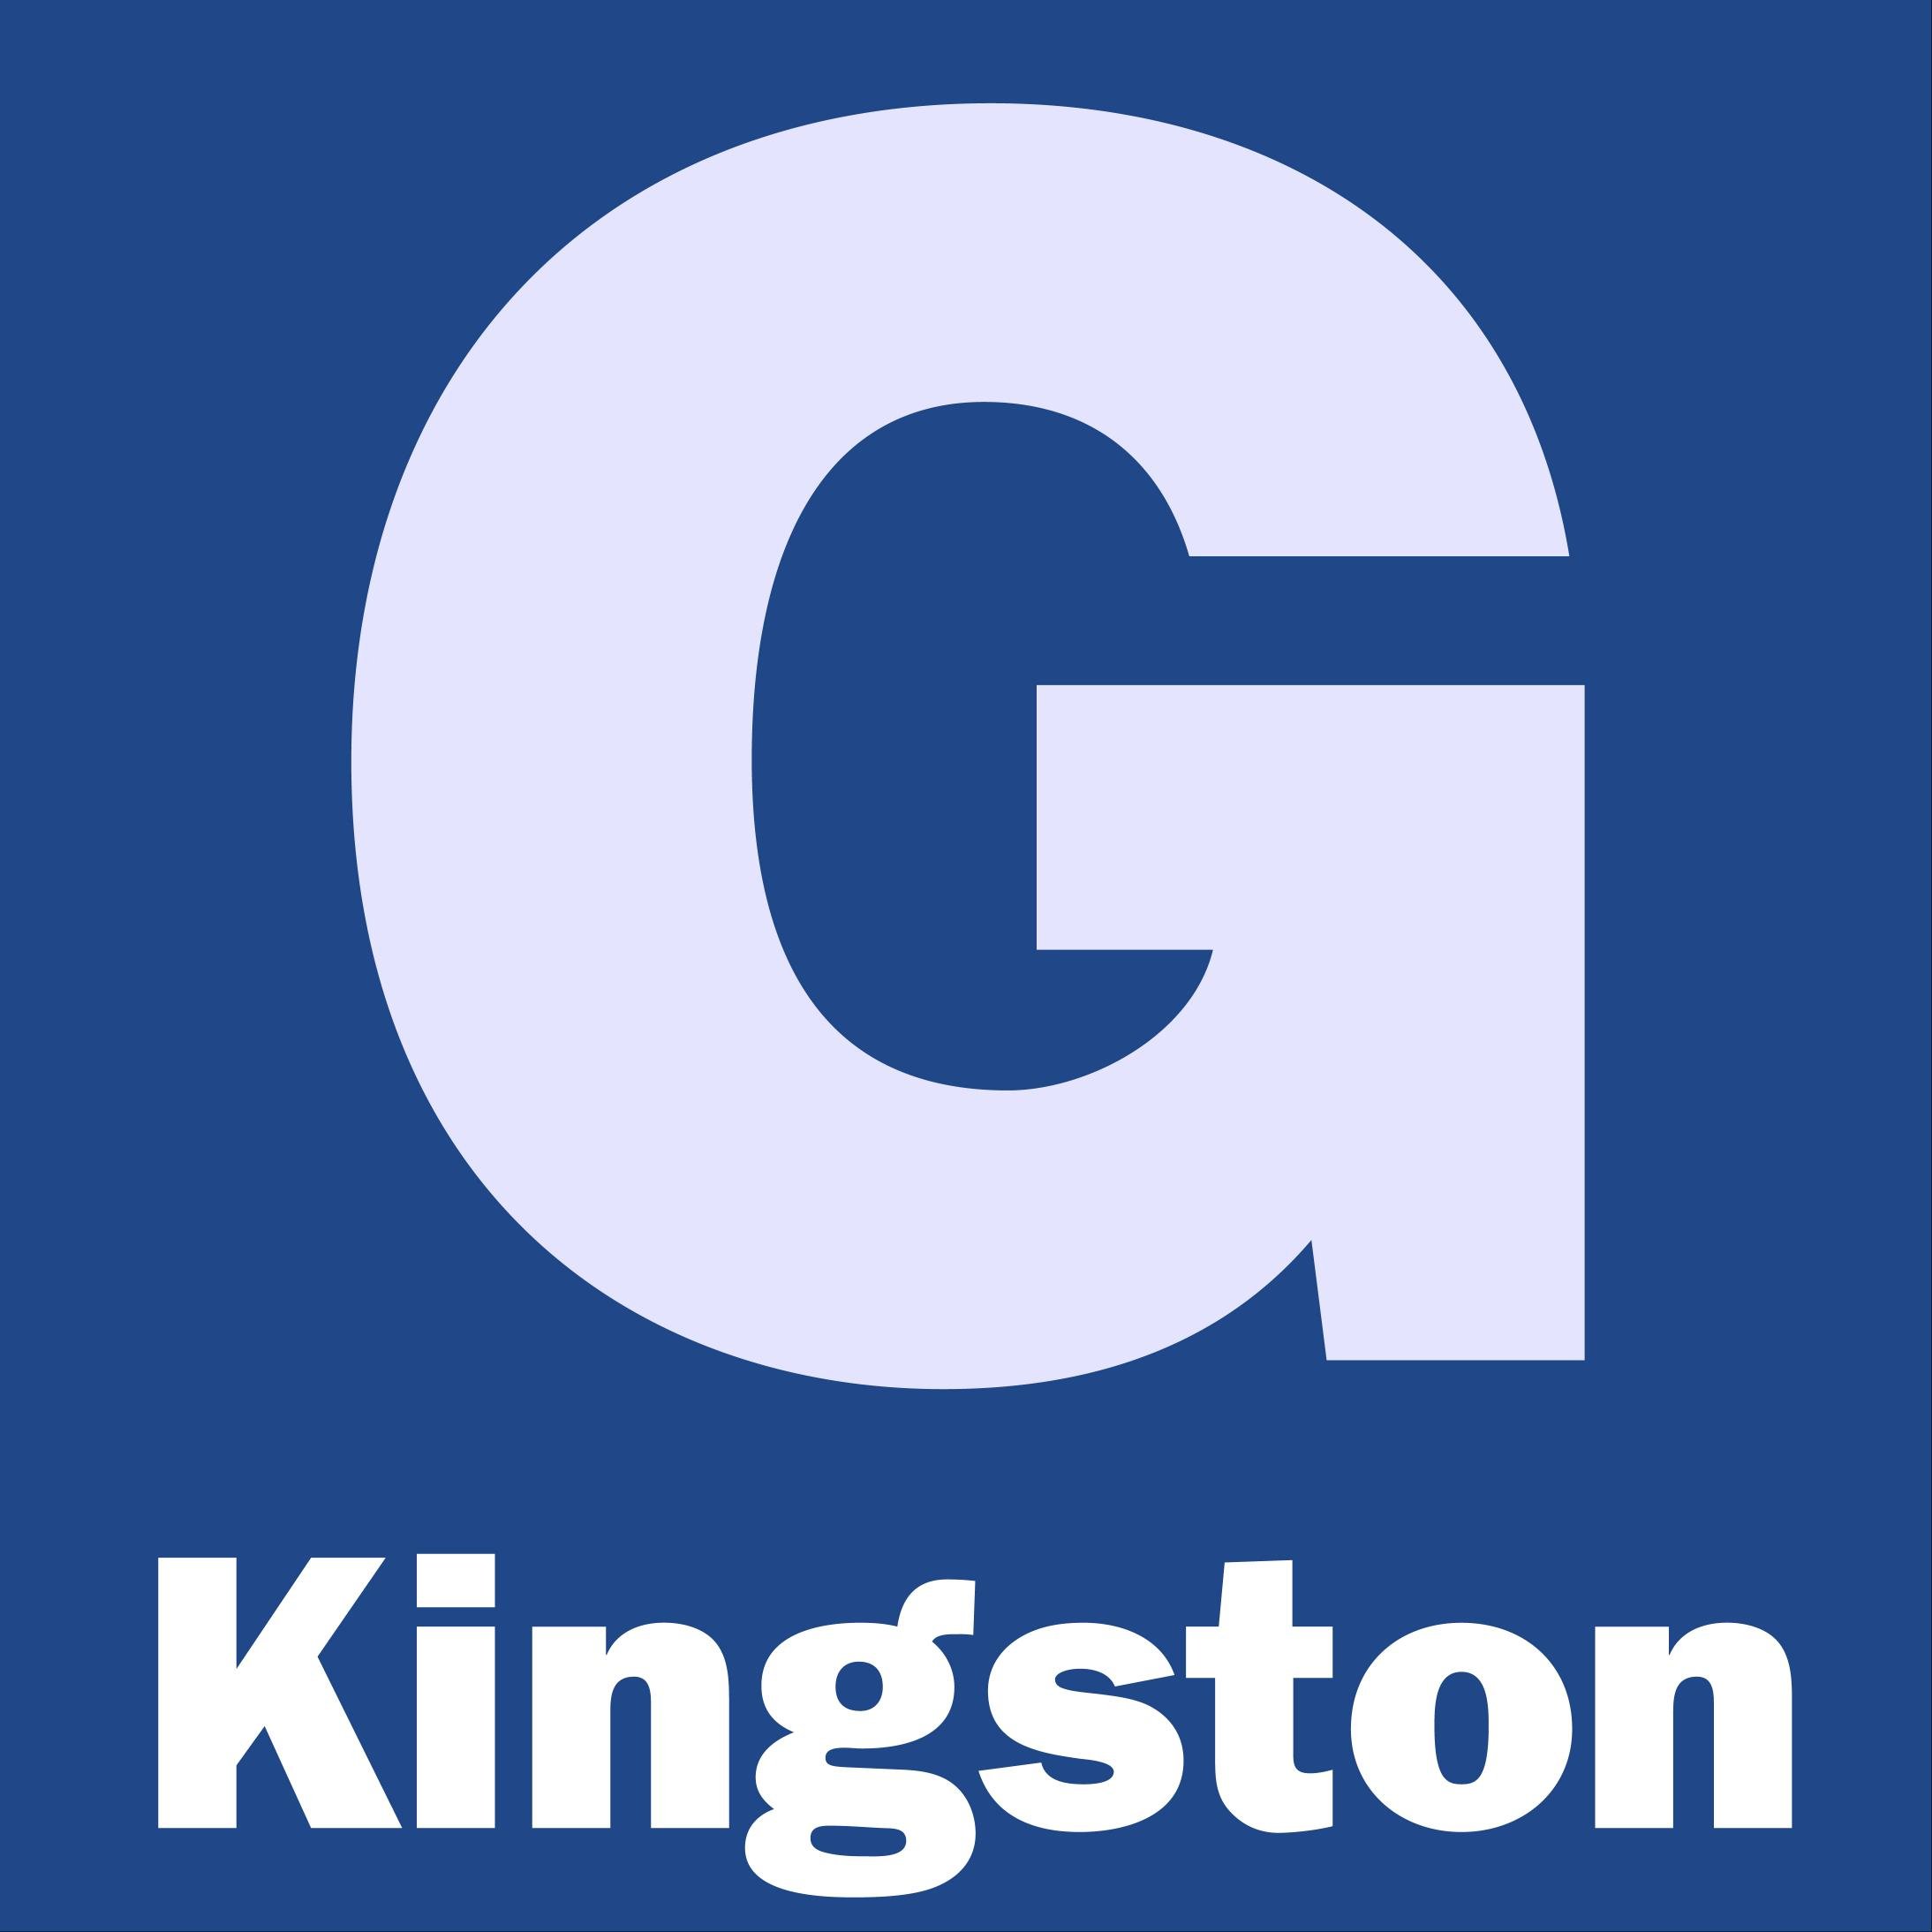 News from Kingston, Surbiton, Tolworth, New Malden, Chessington and Hook. Call us on 020 8722 6317 or email newsdesk@kingstonguardian.co.uk